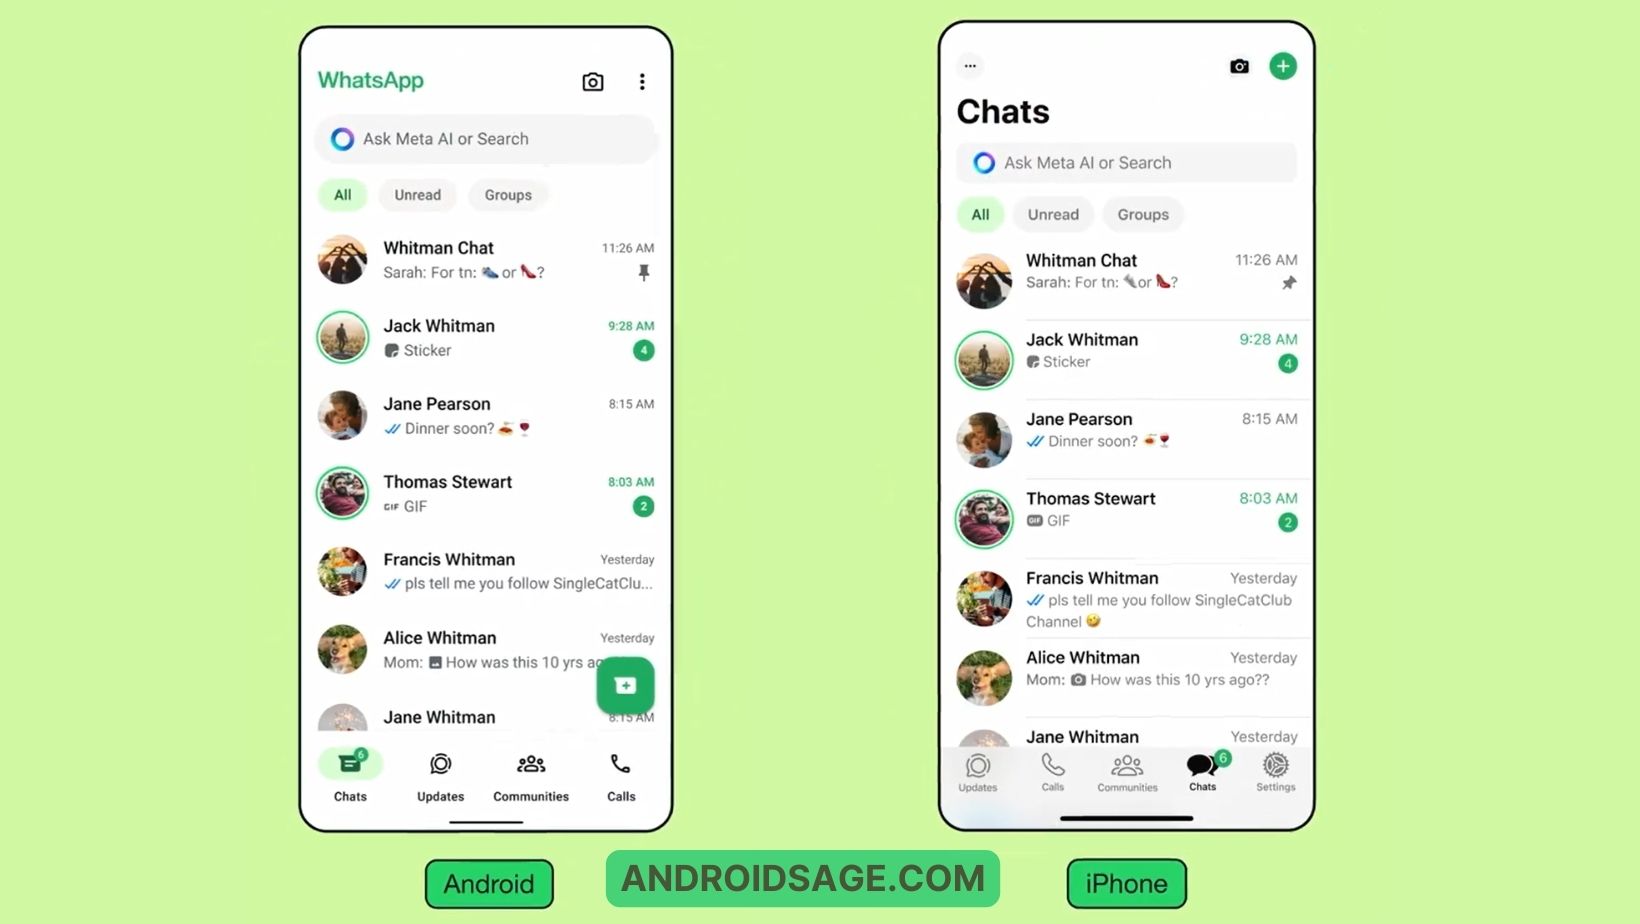 Download WhatsApp APK with New Design and Meta AI